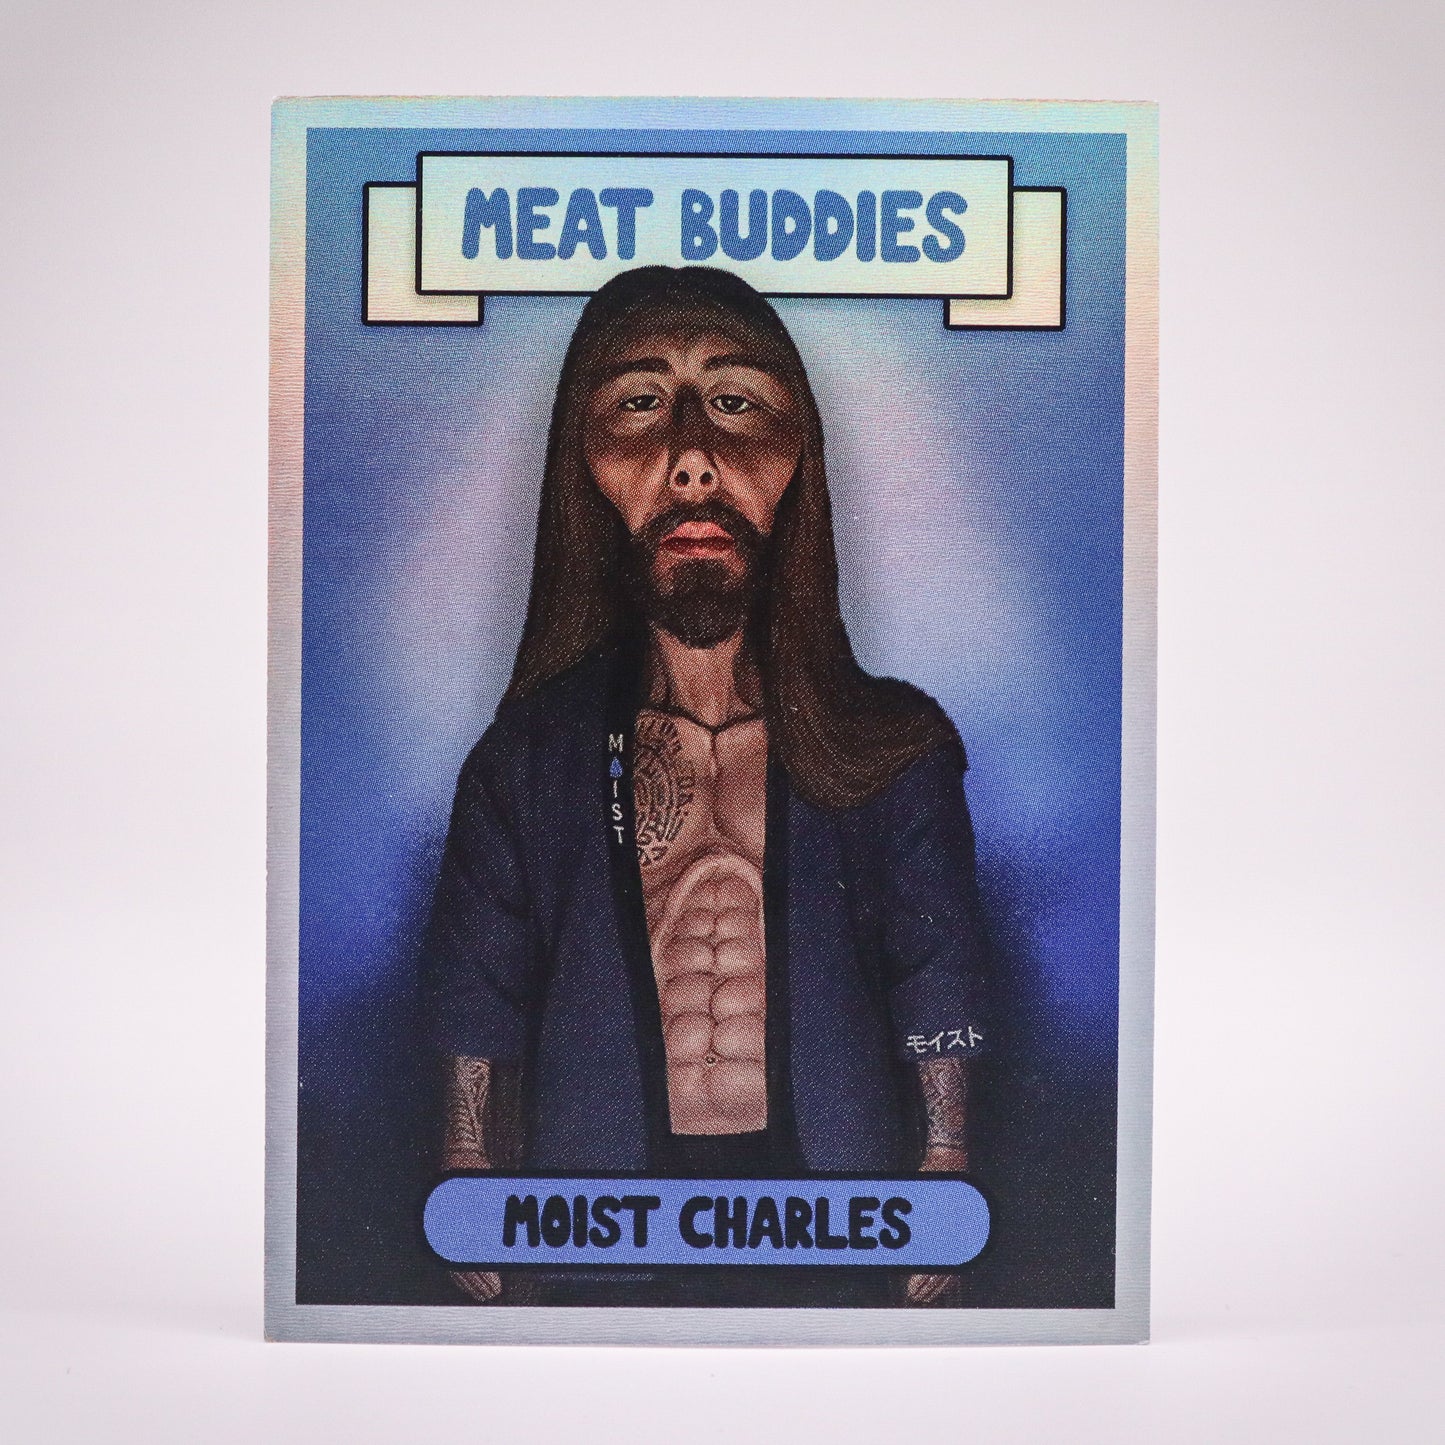 [DAMAGED] MeatCanyon x TRDNG Meat Buddies Series 1